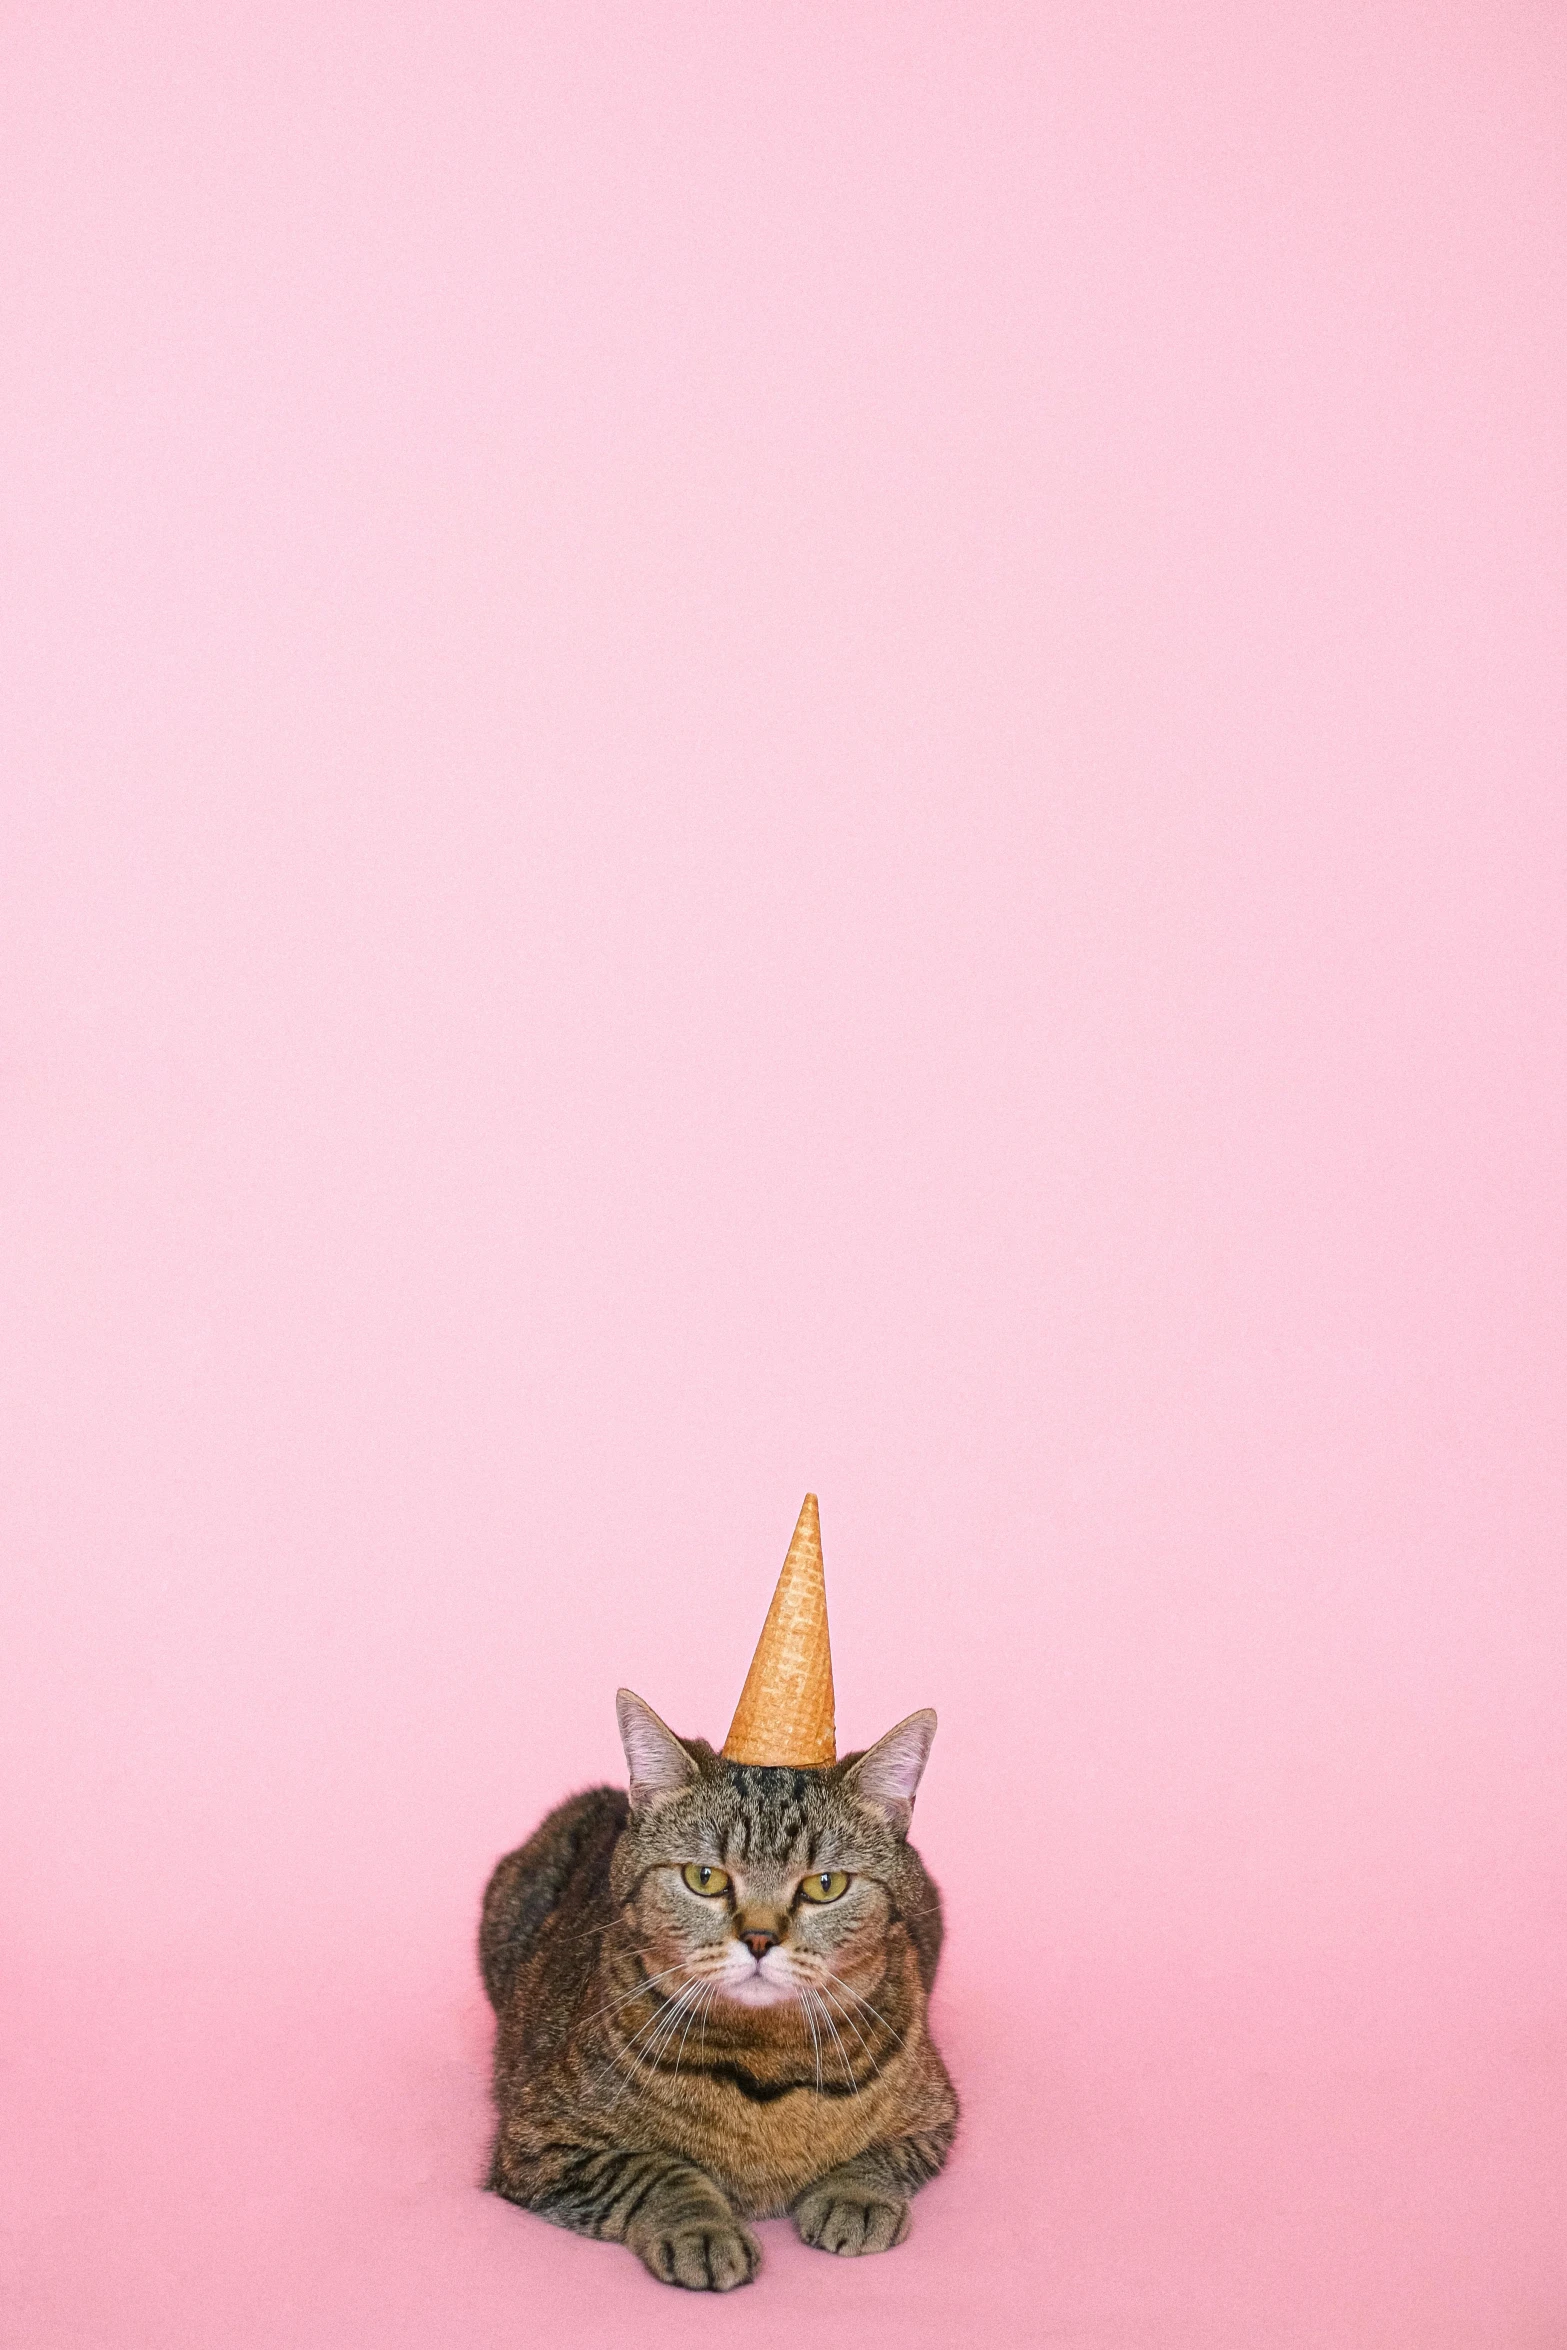 a cat wearing a party hat on a pink background, by Carey Morris, trending on unsplash, ffffound, unicorn horn, martin parr, ice cream cone